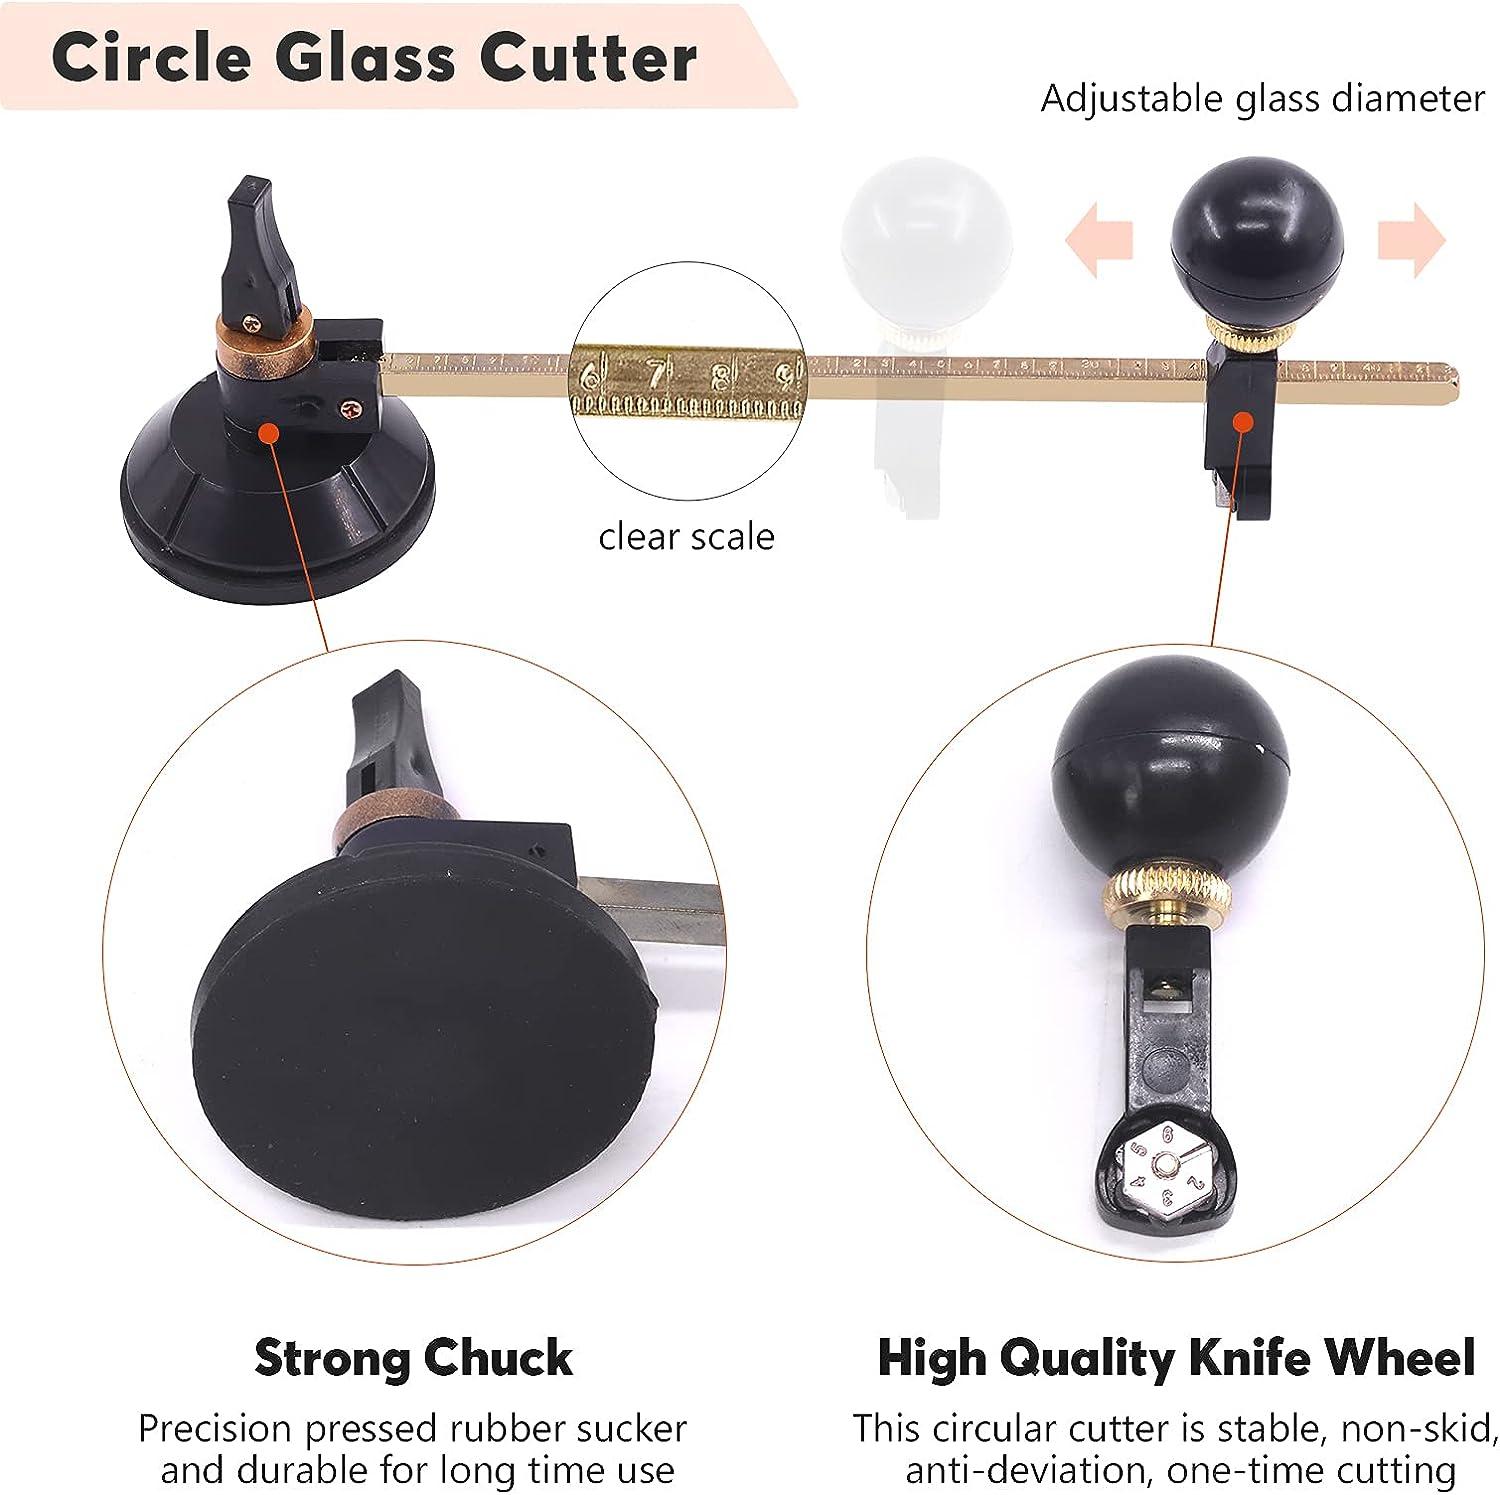 Garosa Portable Circular Glass Cutter Adjustable Glass Ceramic Tile Cutter  with Round Knob Handle and Suction Cup, Maximum Cutting Diameter 40cm/15.75